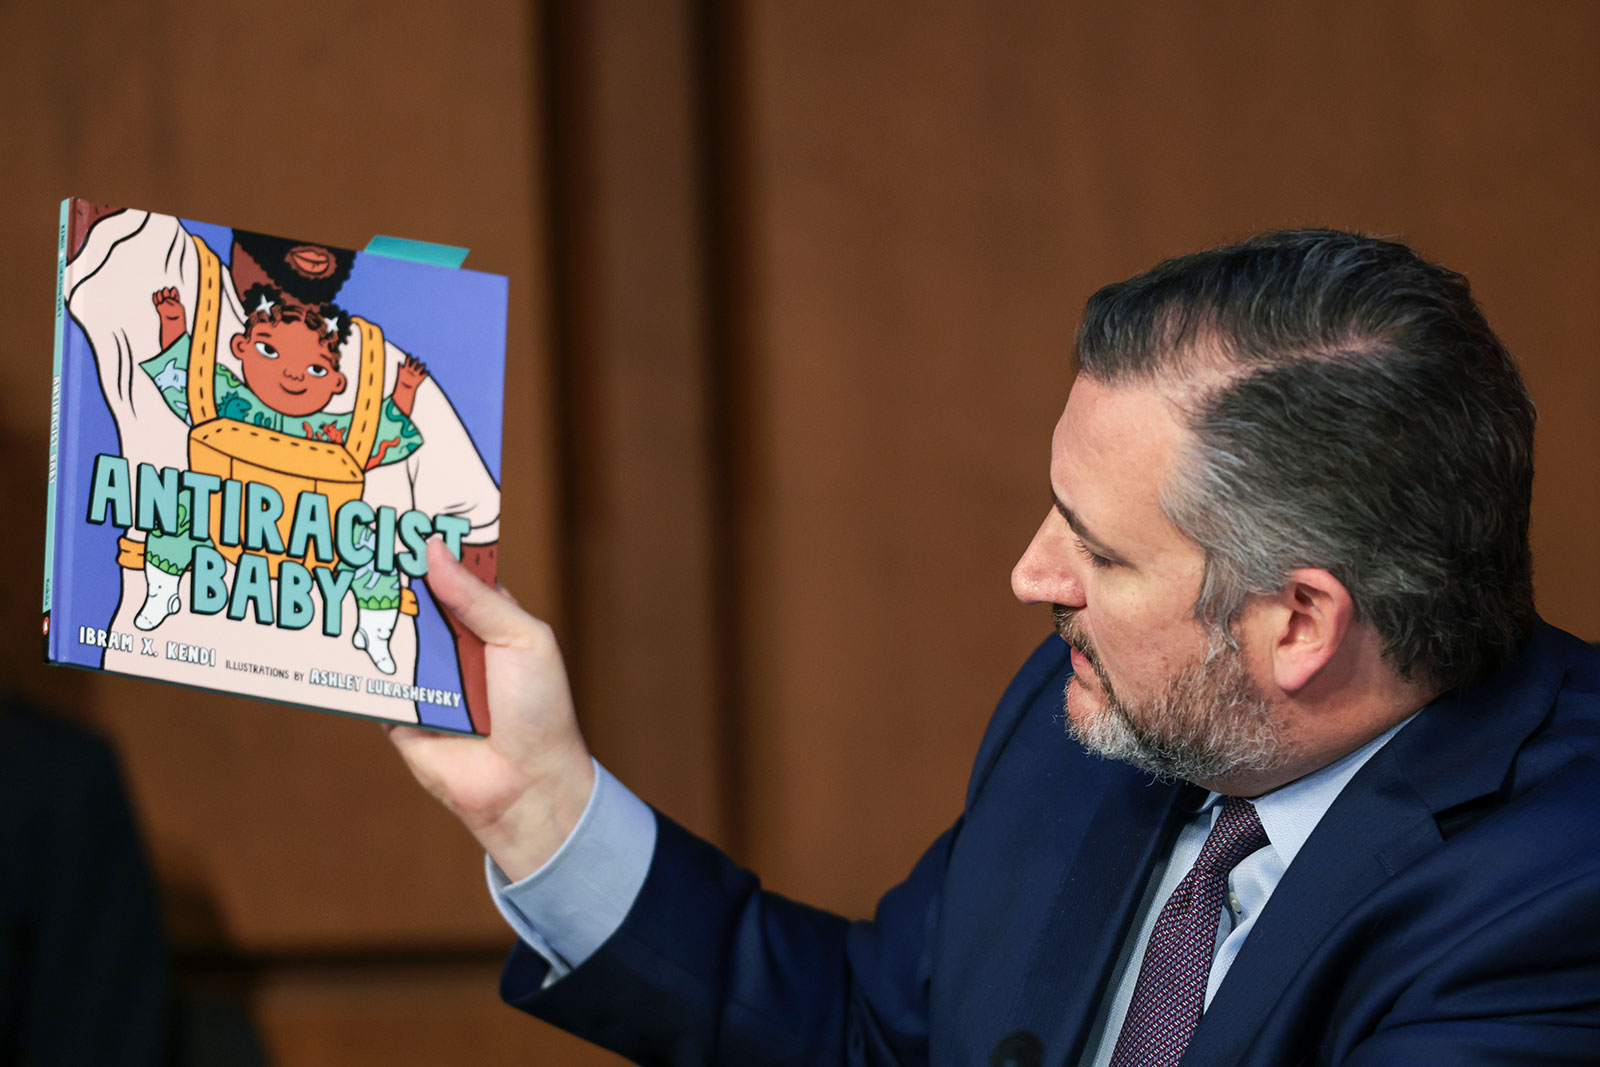 Sen. Ted Cruz holds up a book as he questions Supreme Court nominee Judge Ketanji Brown Jackson during her confirmation hearing.